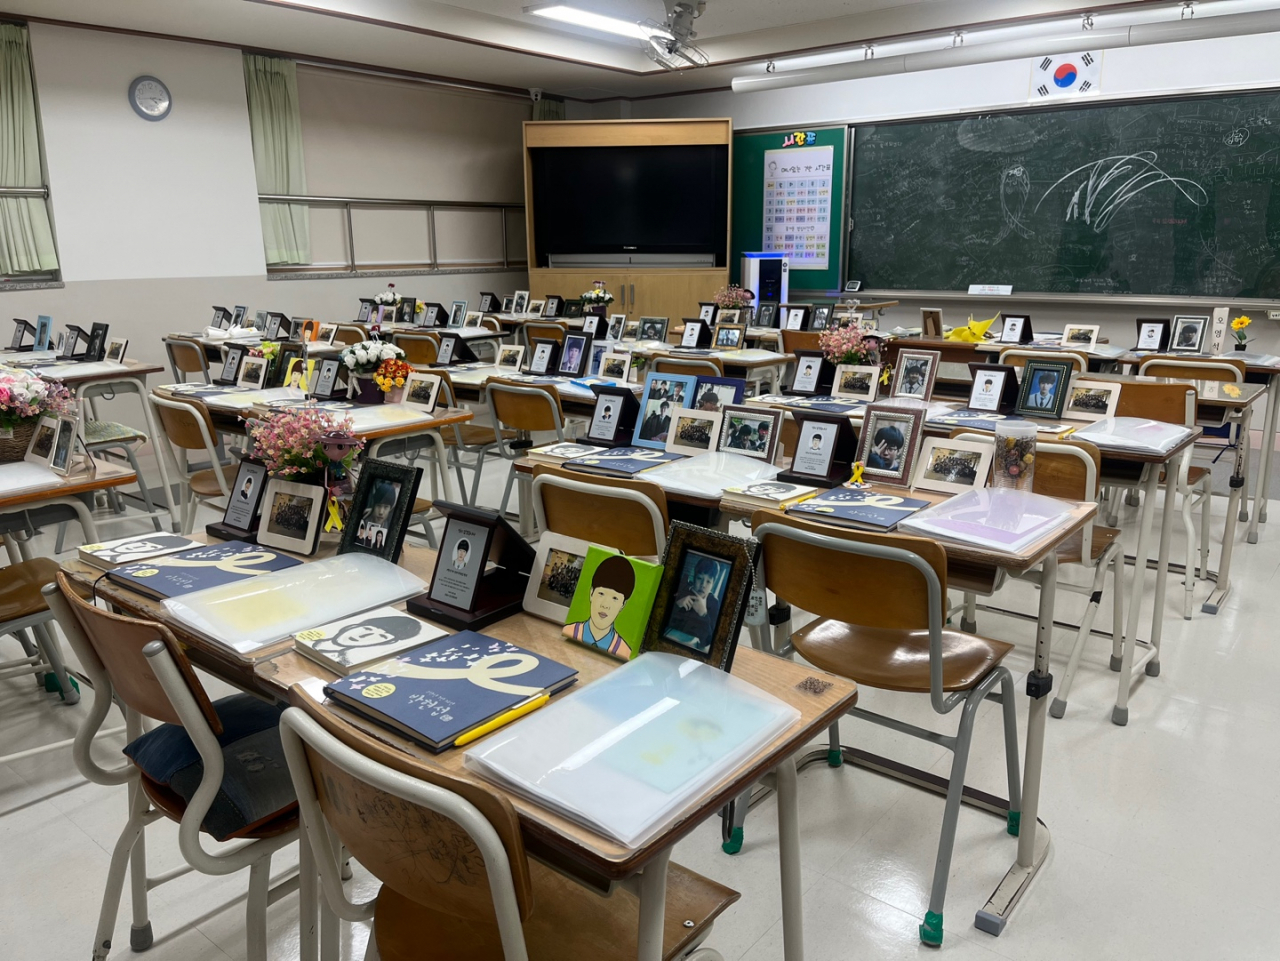 Memorial classrooms have been set up for the students and teachers of Danwon High School who lost their lives in the April 2014 Sewol ferry disaster, in Ansan, Gyeonggi Province. Consisting of 10 rooms for second-year students and one for teachers, the memorial classrooms keep the desks, chairs, blackboards, windows, and doors used by students and teachers who perished. (Lee Jaeeun/The Korea Herald)